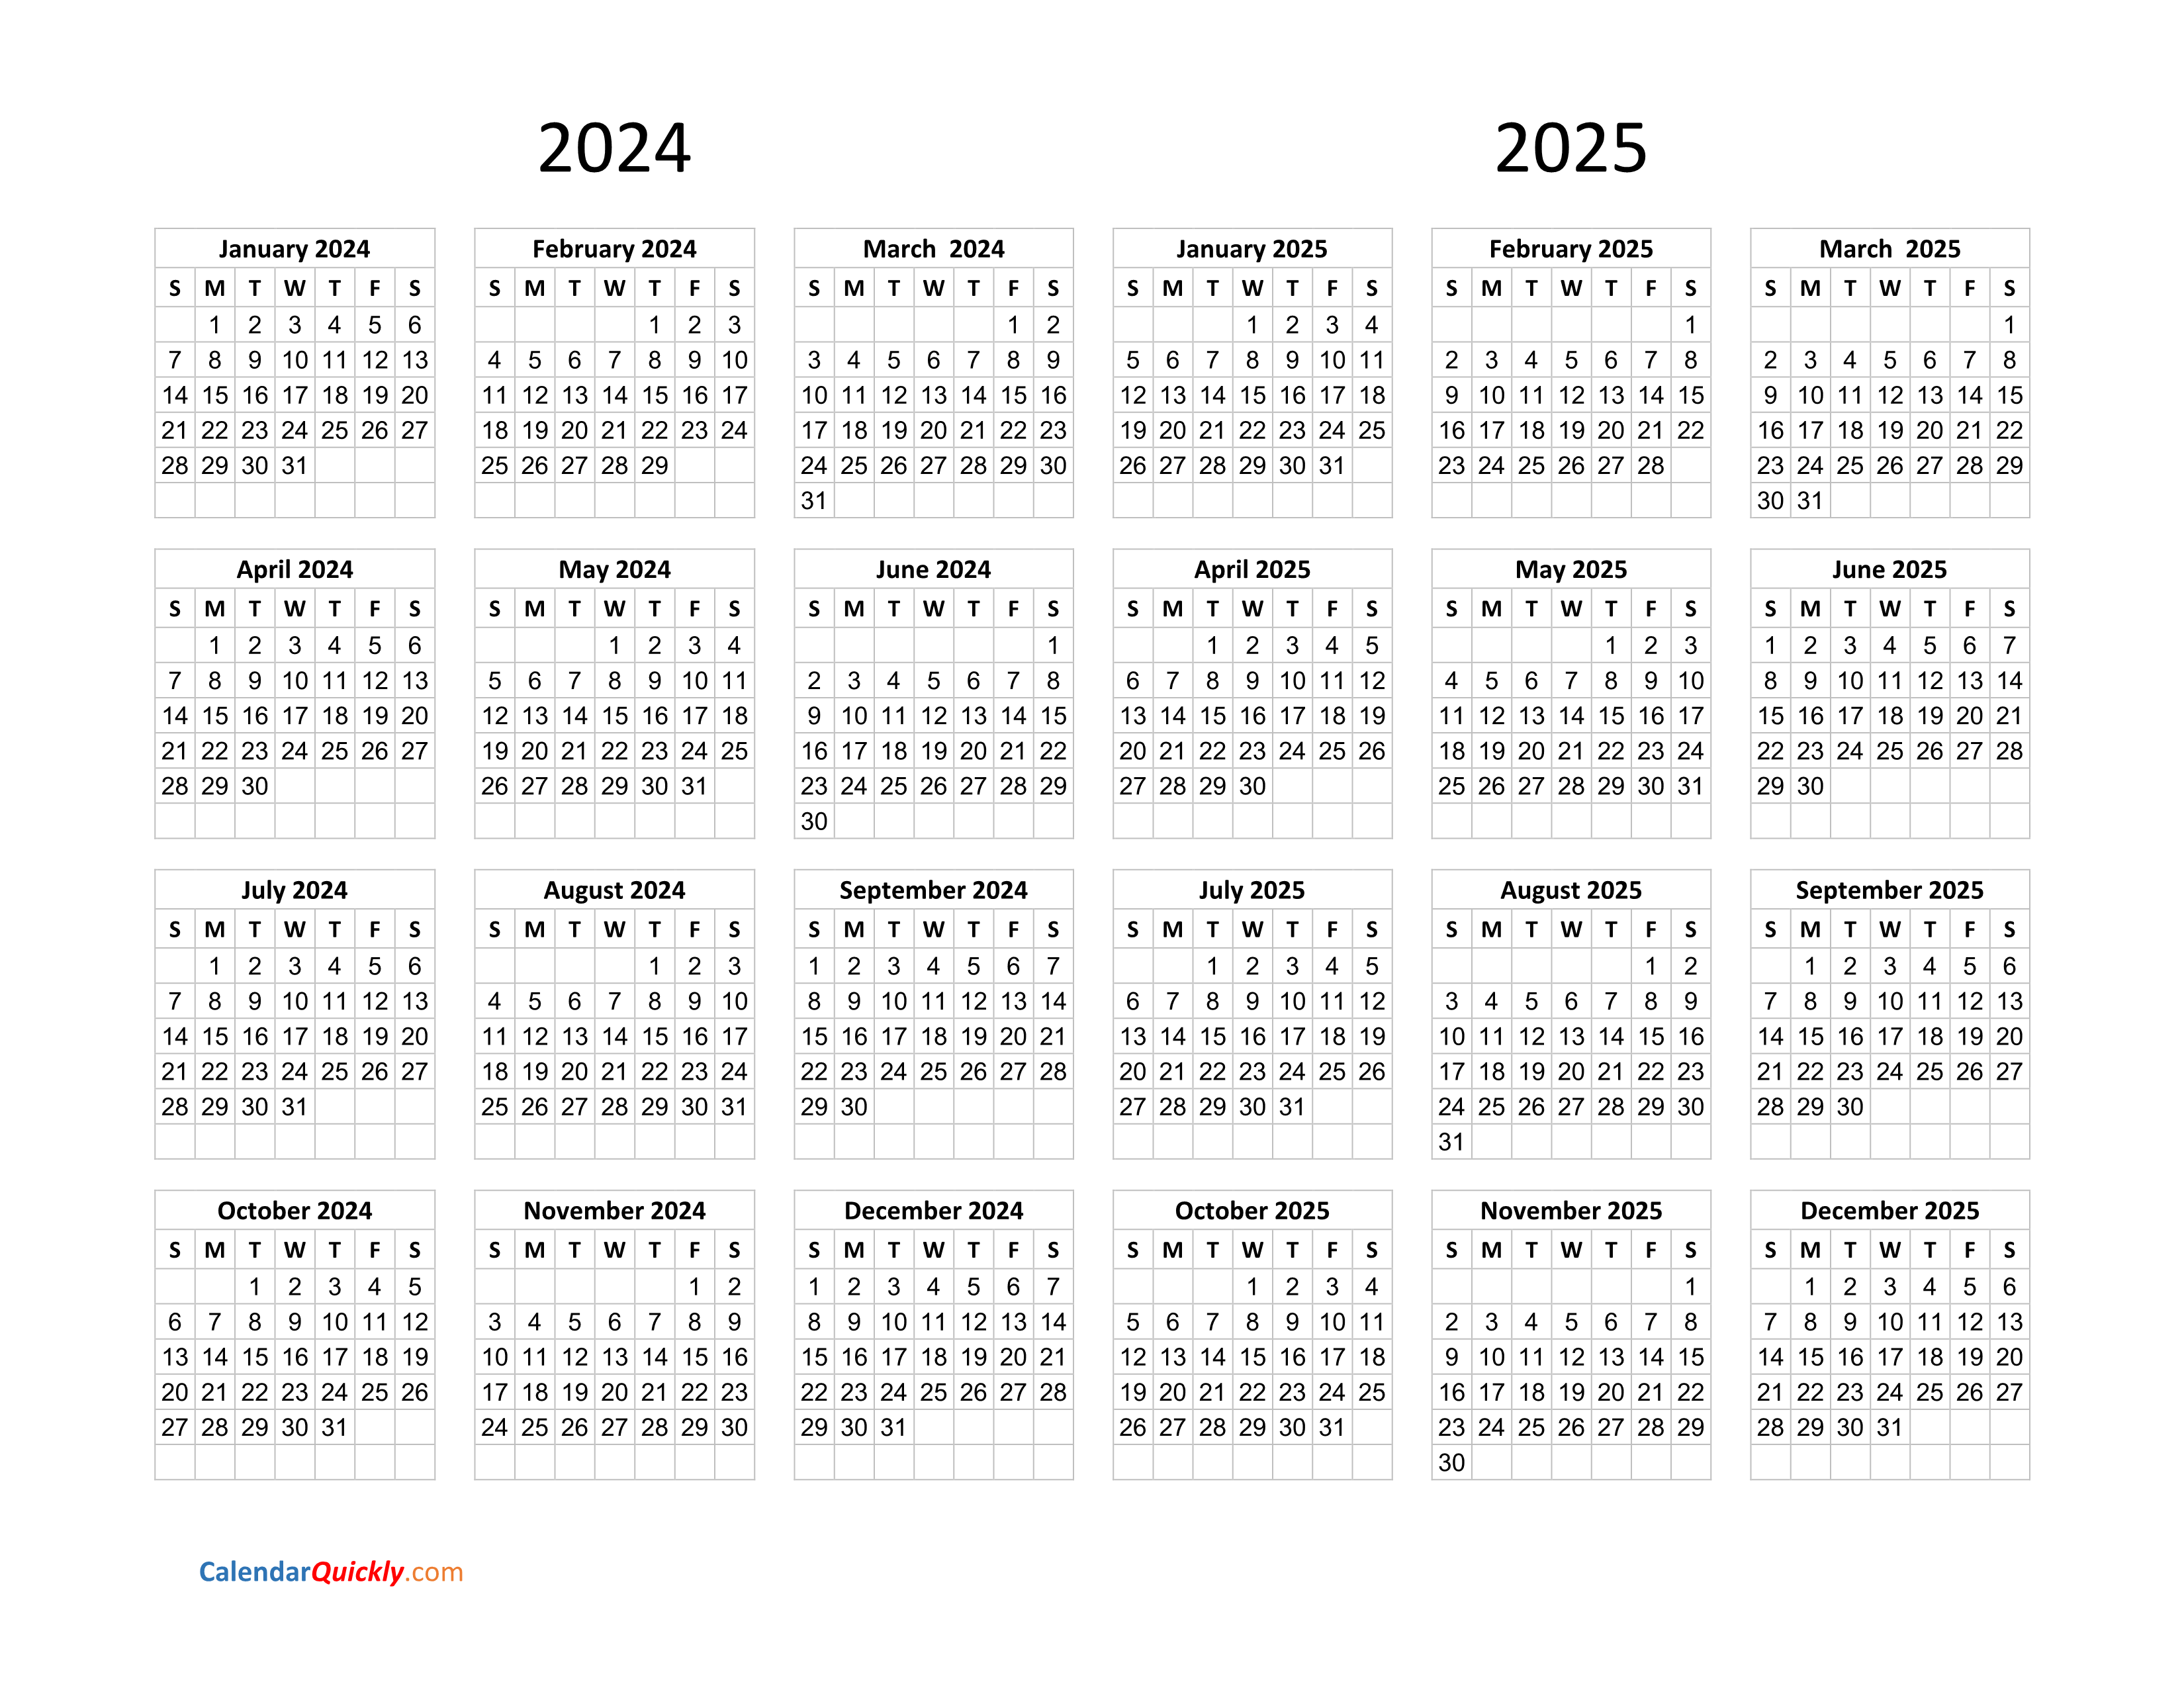 calendar-2024-and-2025-on-one-page-calendar-quickly